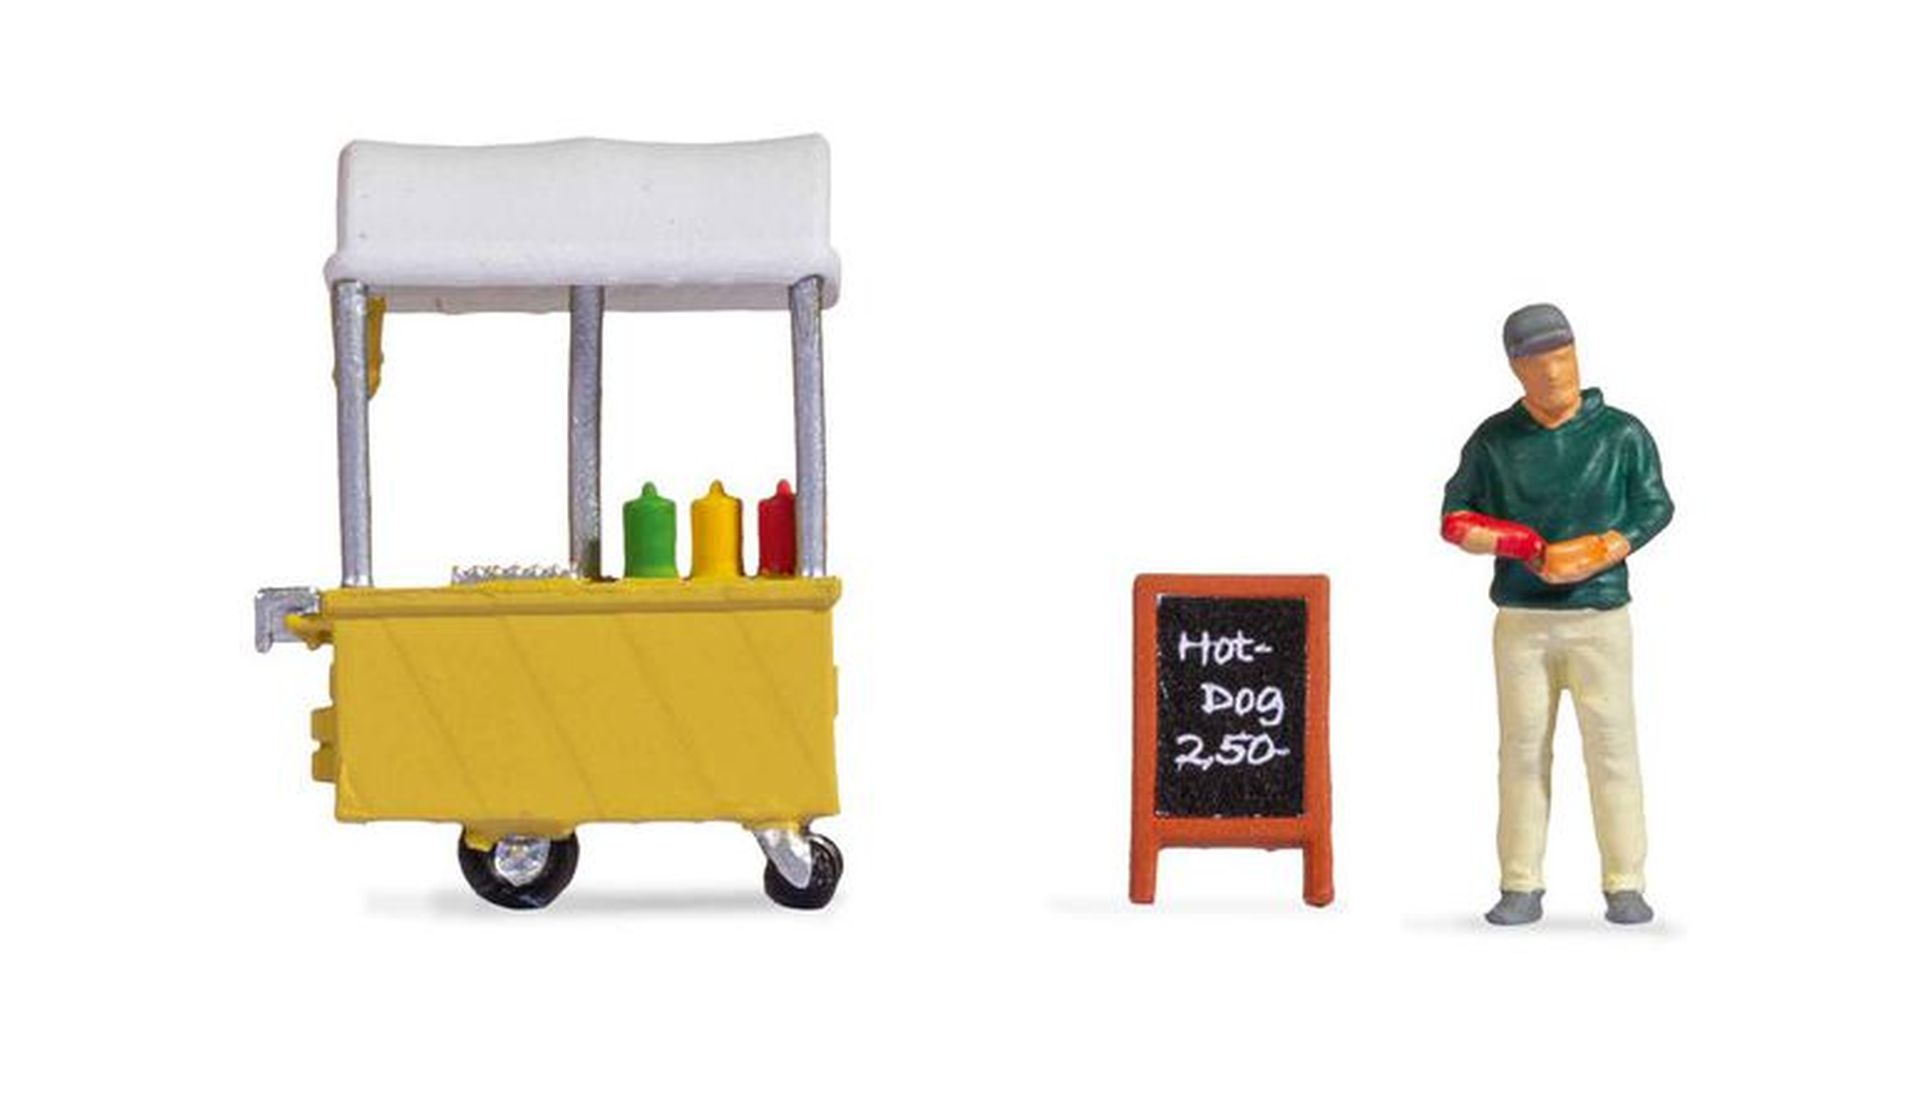 Noch 16505 - Tiny-Scenes 'Hot-Dog Stand'